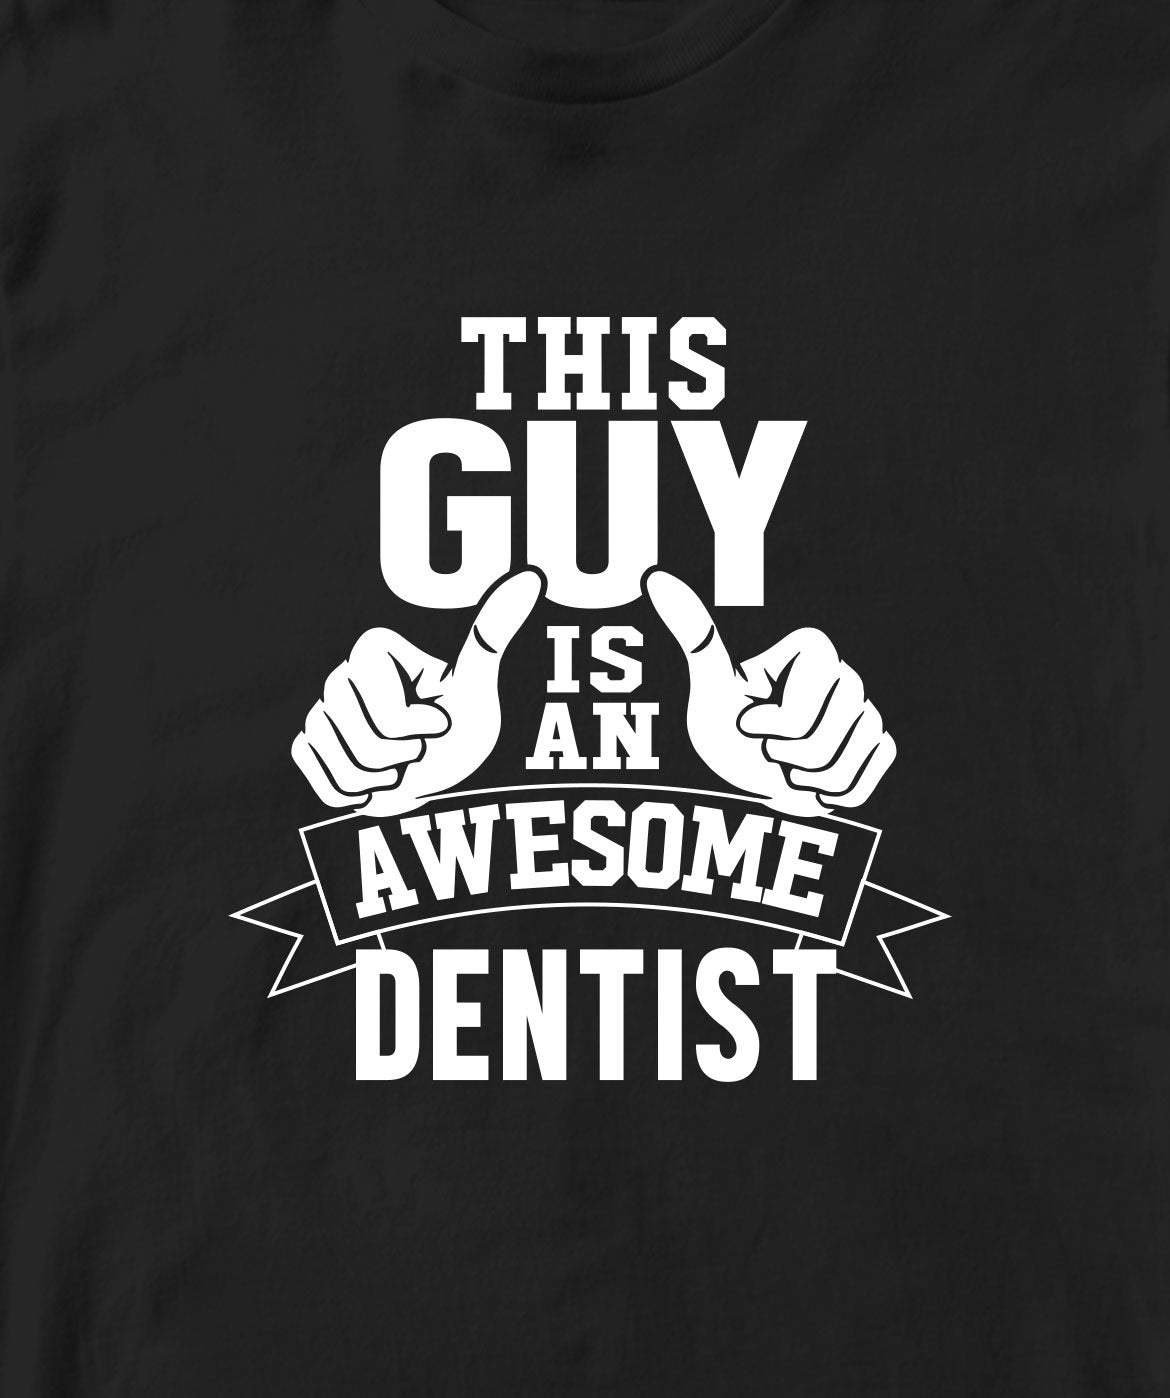 THIS GUY IS AN AWESOME DENTIST TSHIRT